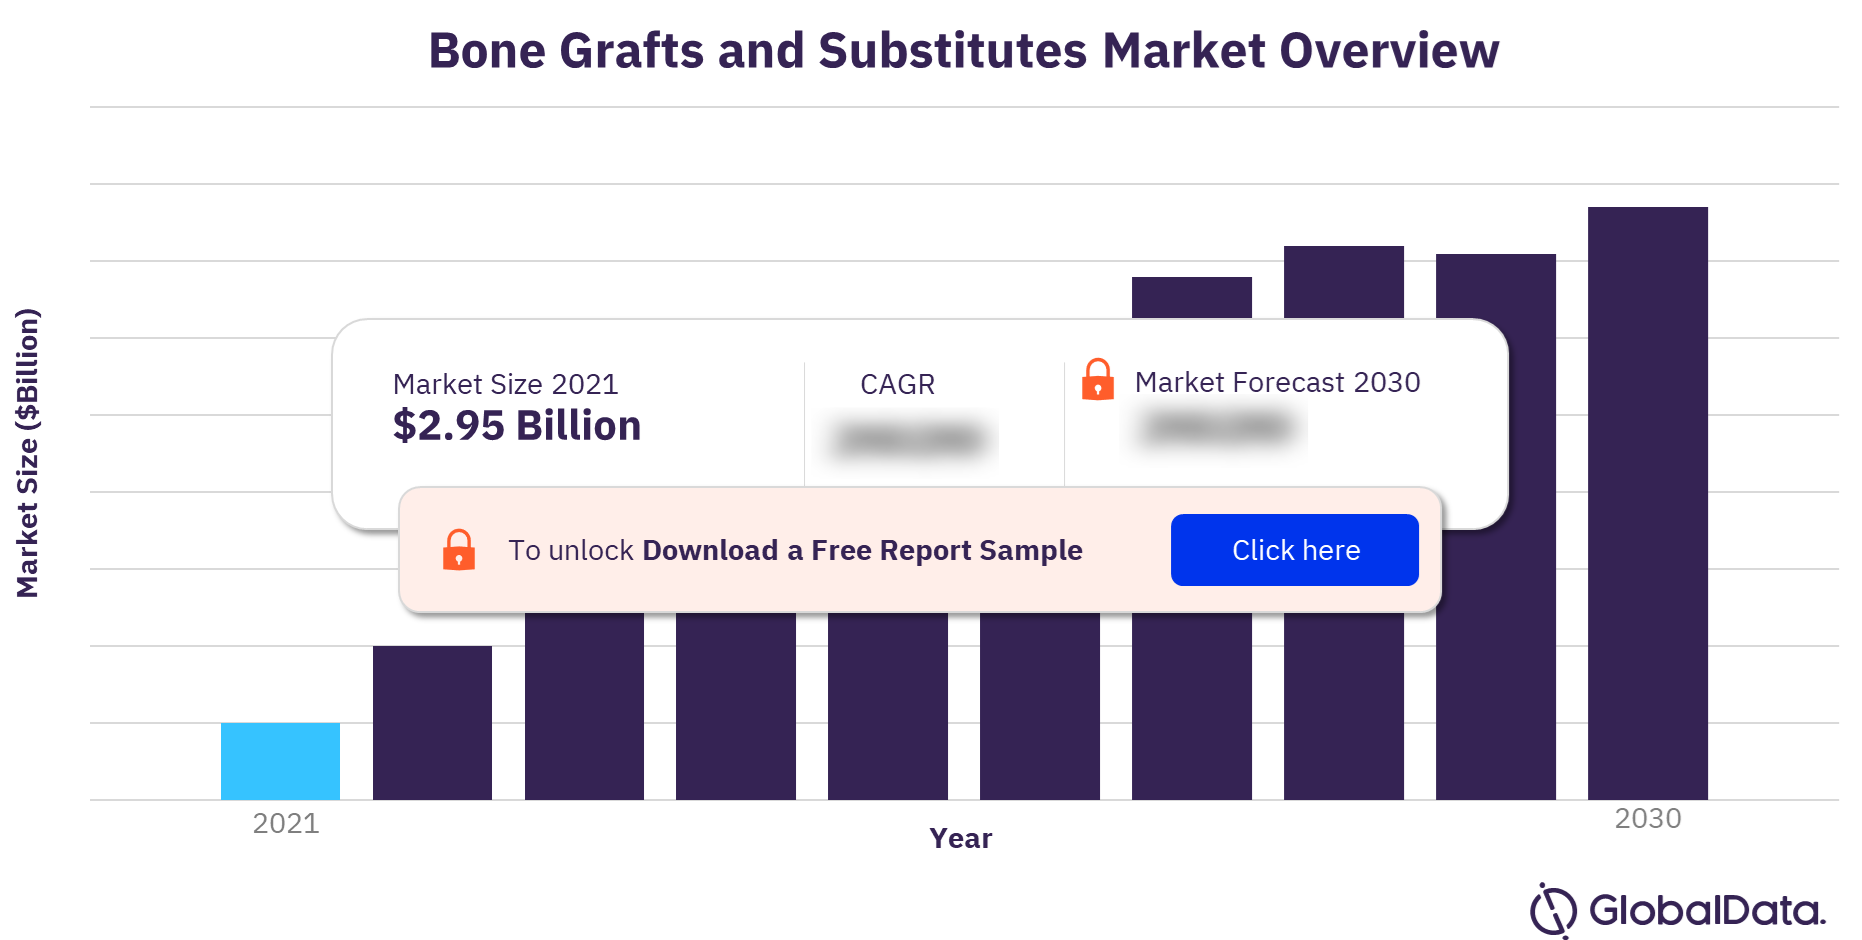 Bone Grafts and Substitutes Market Overview